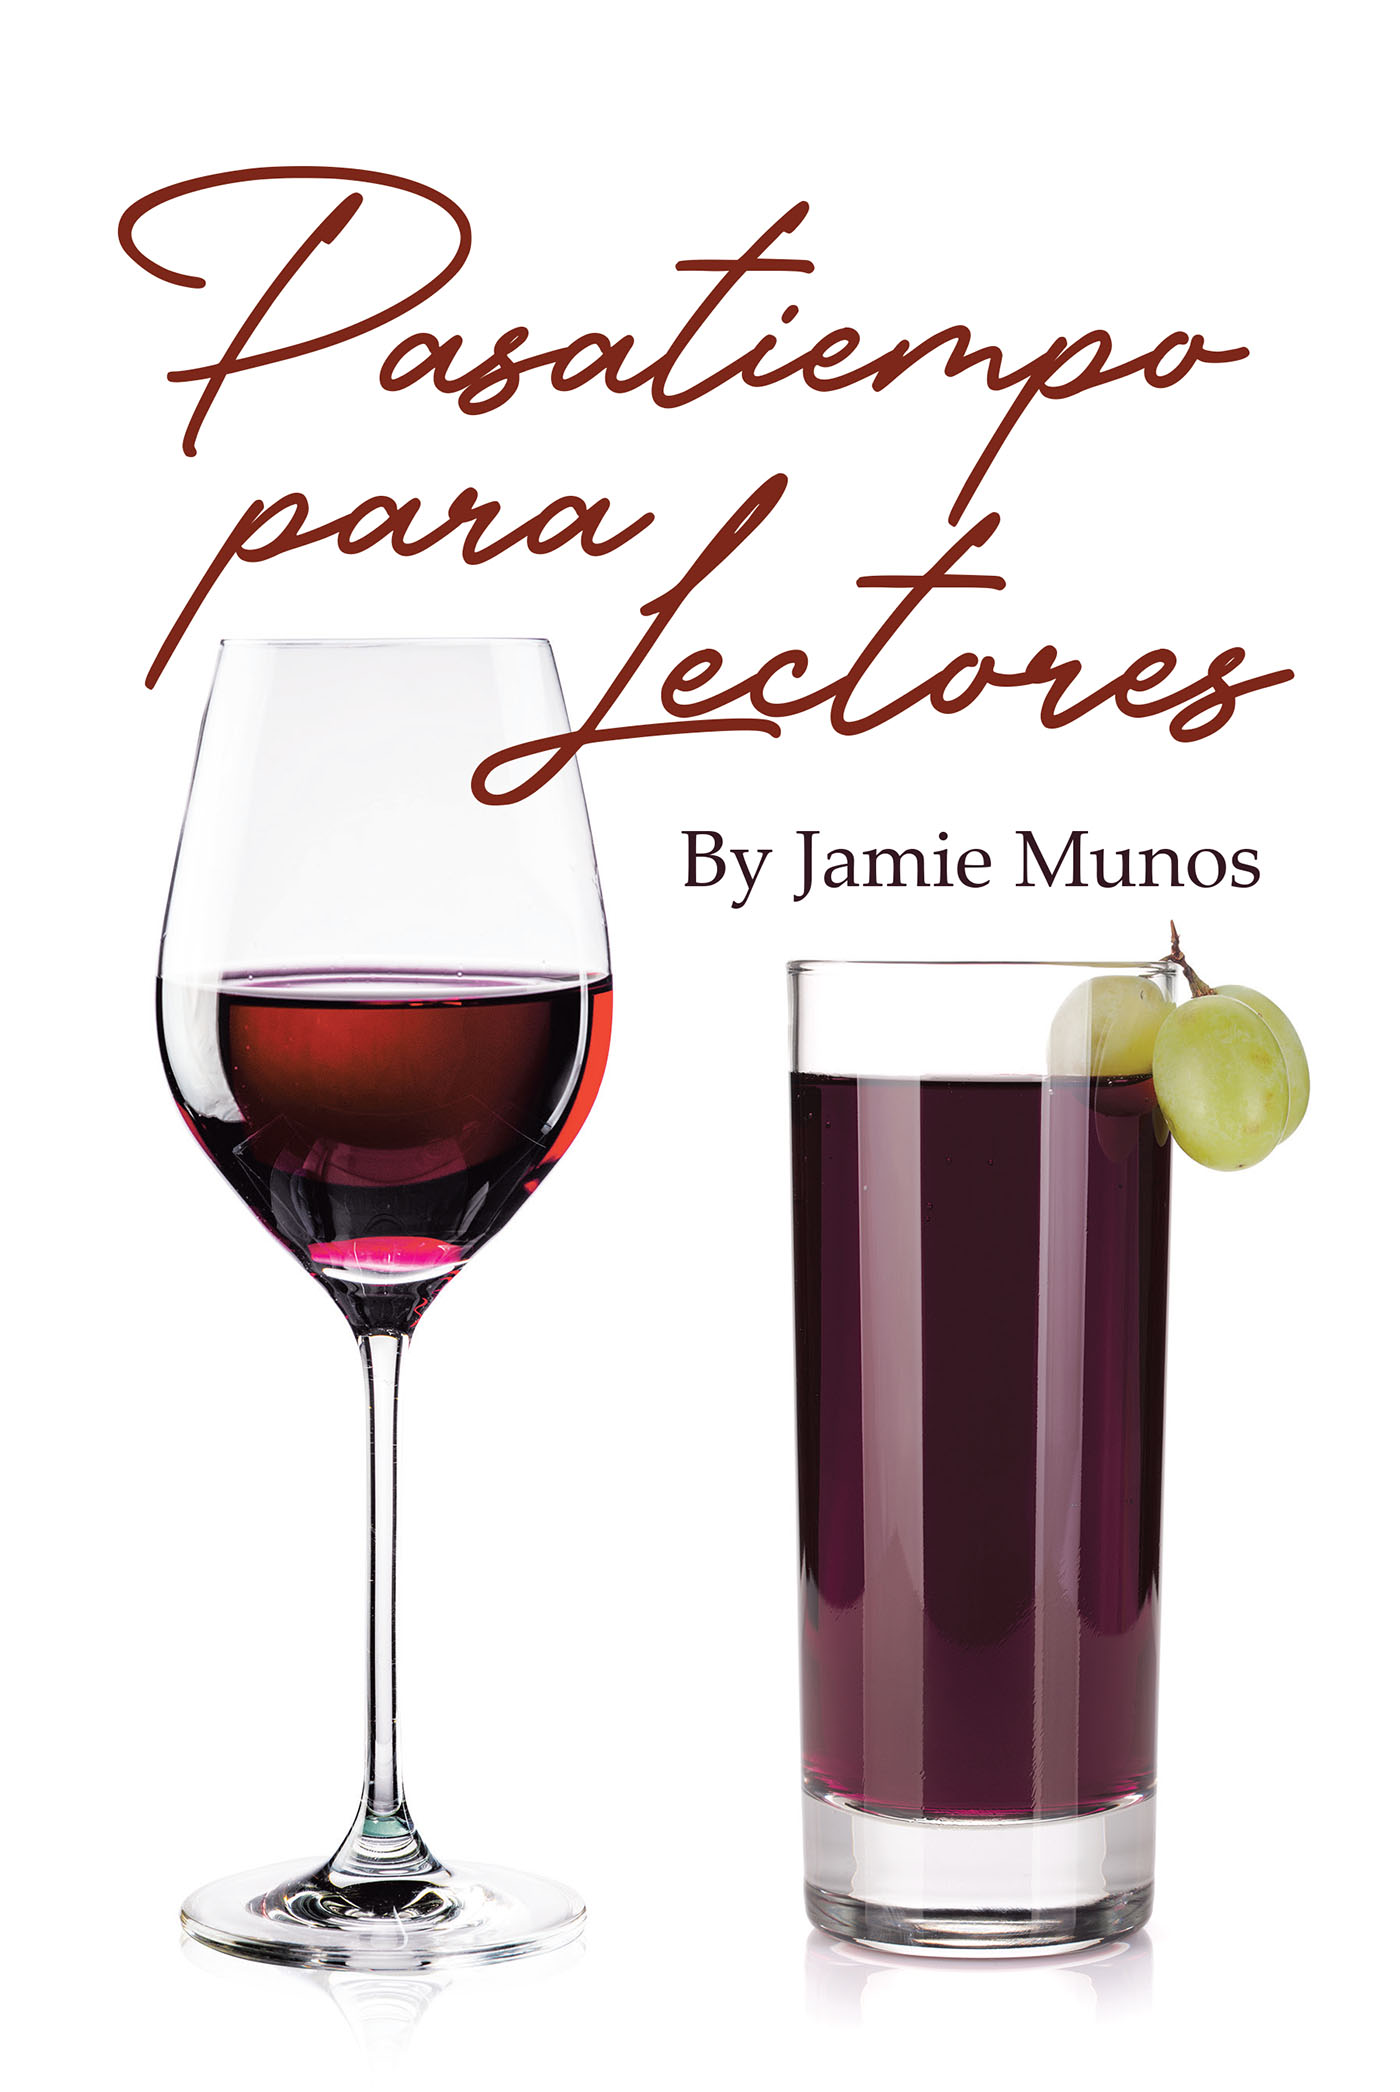 Jamie Munos’s New Book, "Pasatiempo para Lectores," is a Book That Explores Issues in Politics and Sexuality